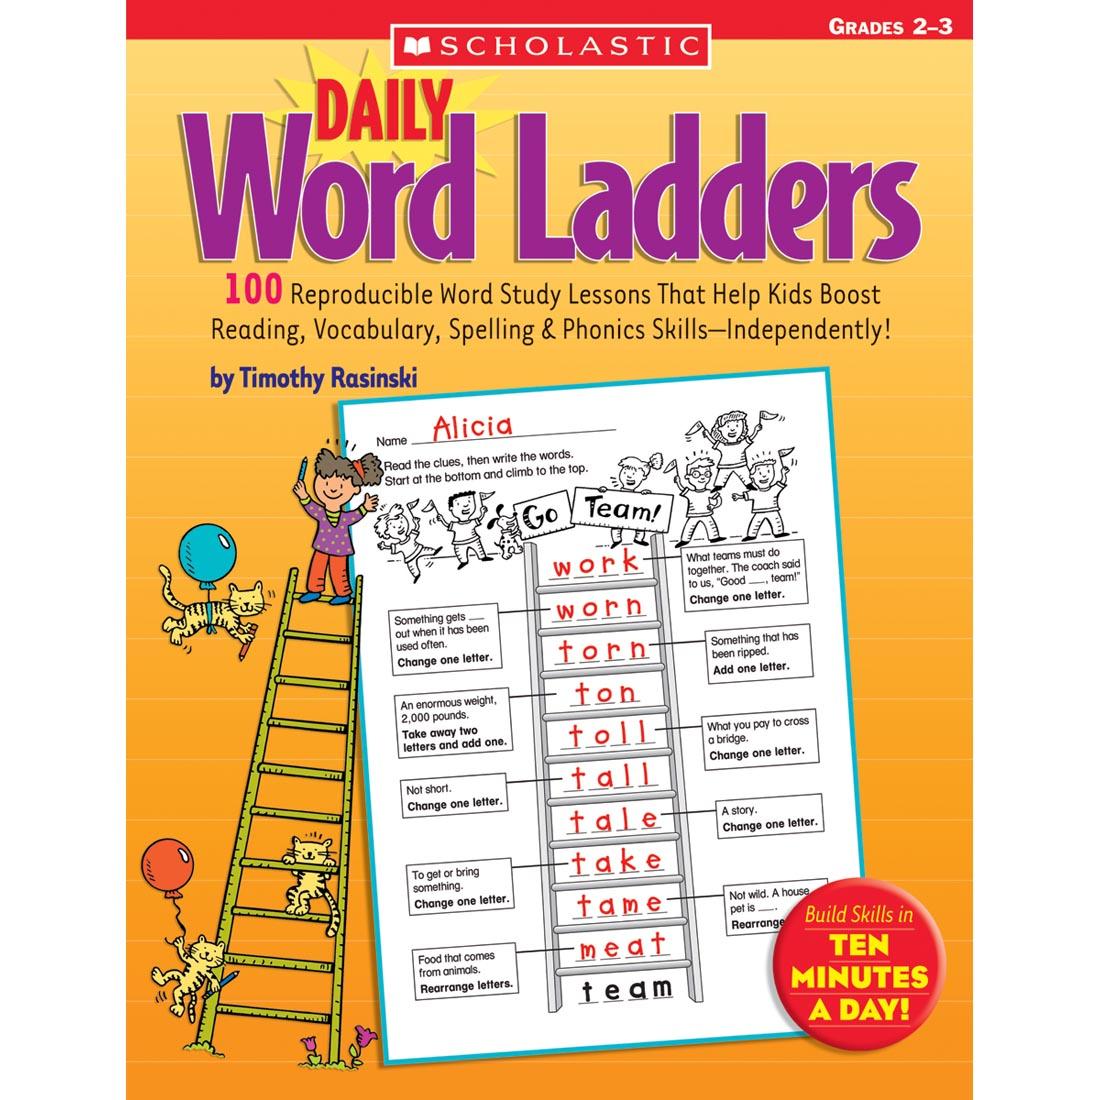 Scholastic Daily Word Ladders Grades 2-3